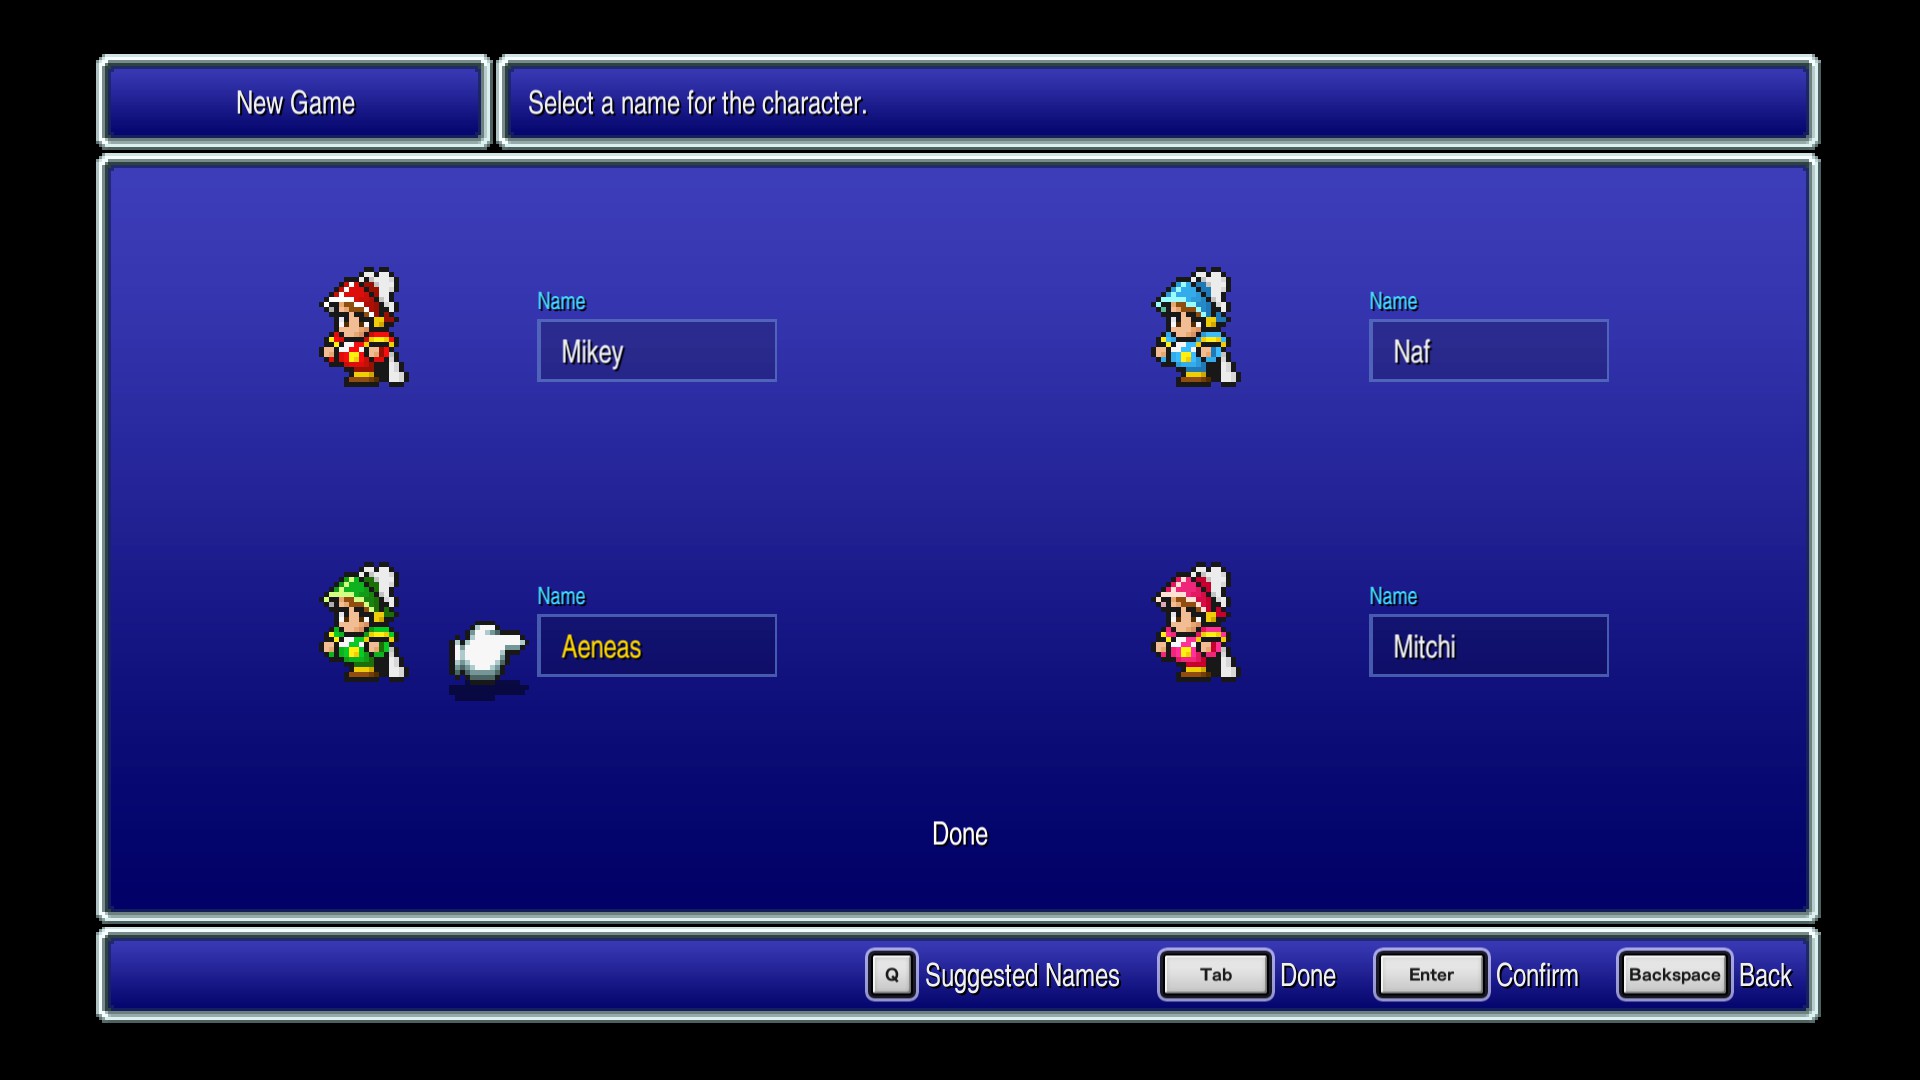 Screenshot from FF3 Pixel Remaster. This shows the character naming screen with four Onion Knight sprites, each with a name box beside them. There is a Red one named Mikey, a Blue one named Naf, a Green one named Aeneas, and a Pink one named Mitchi